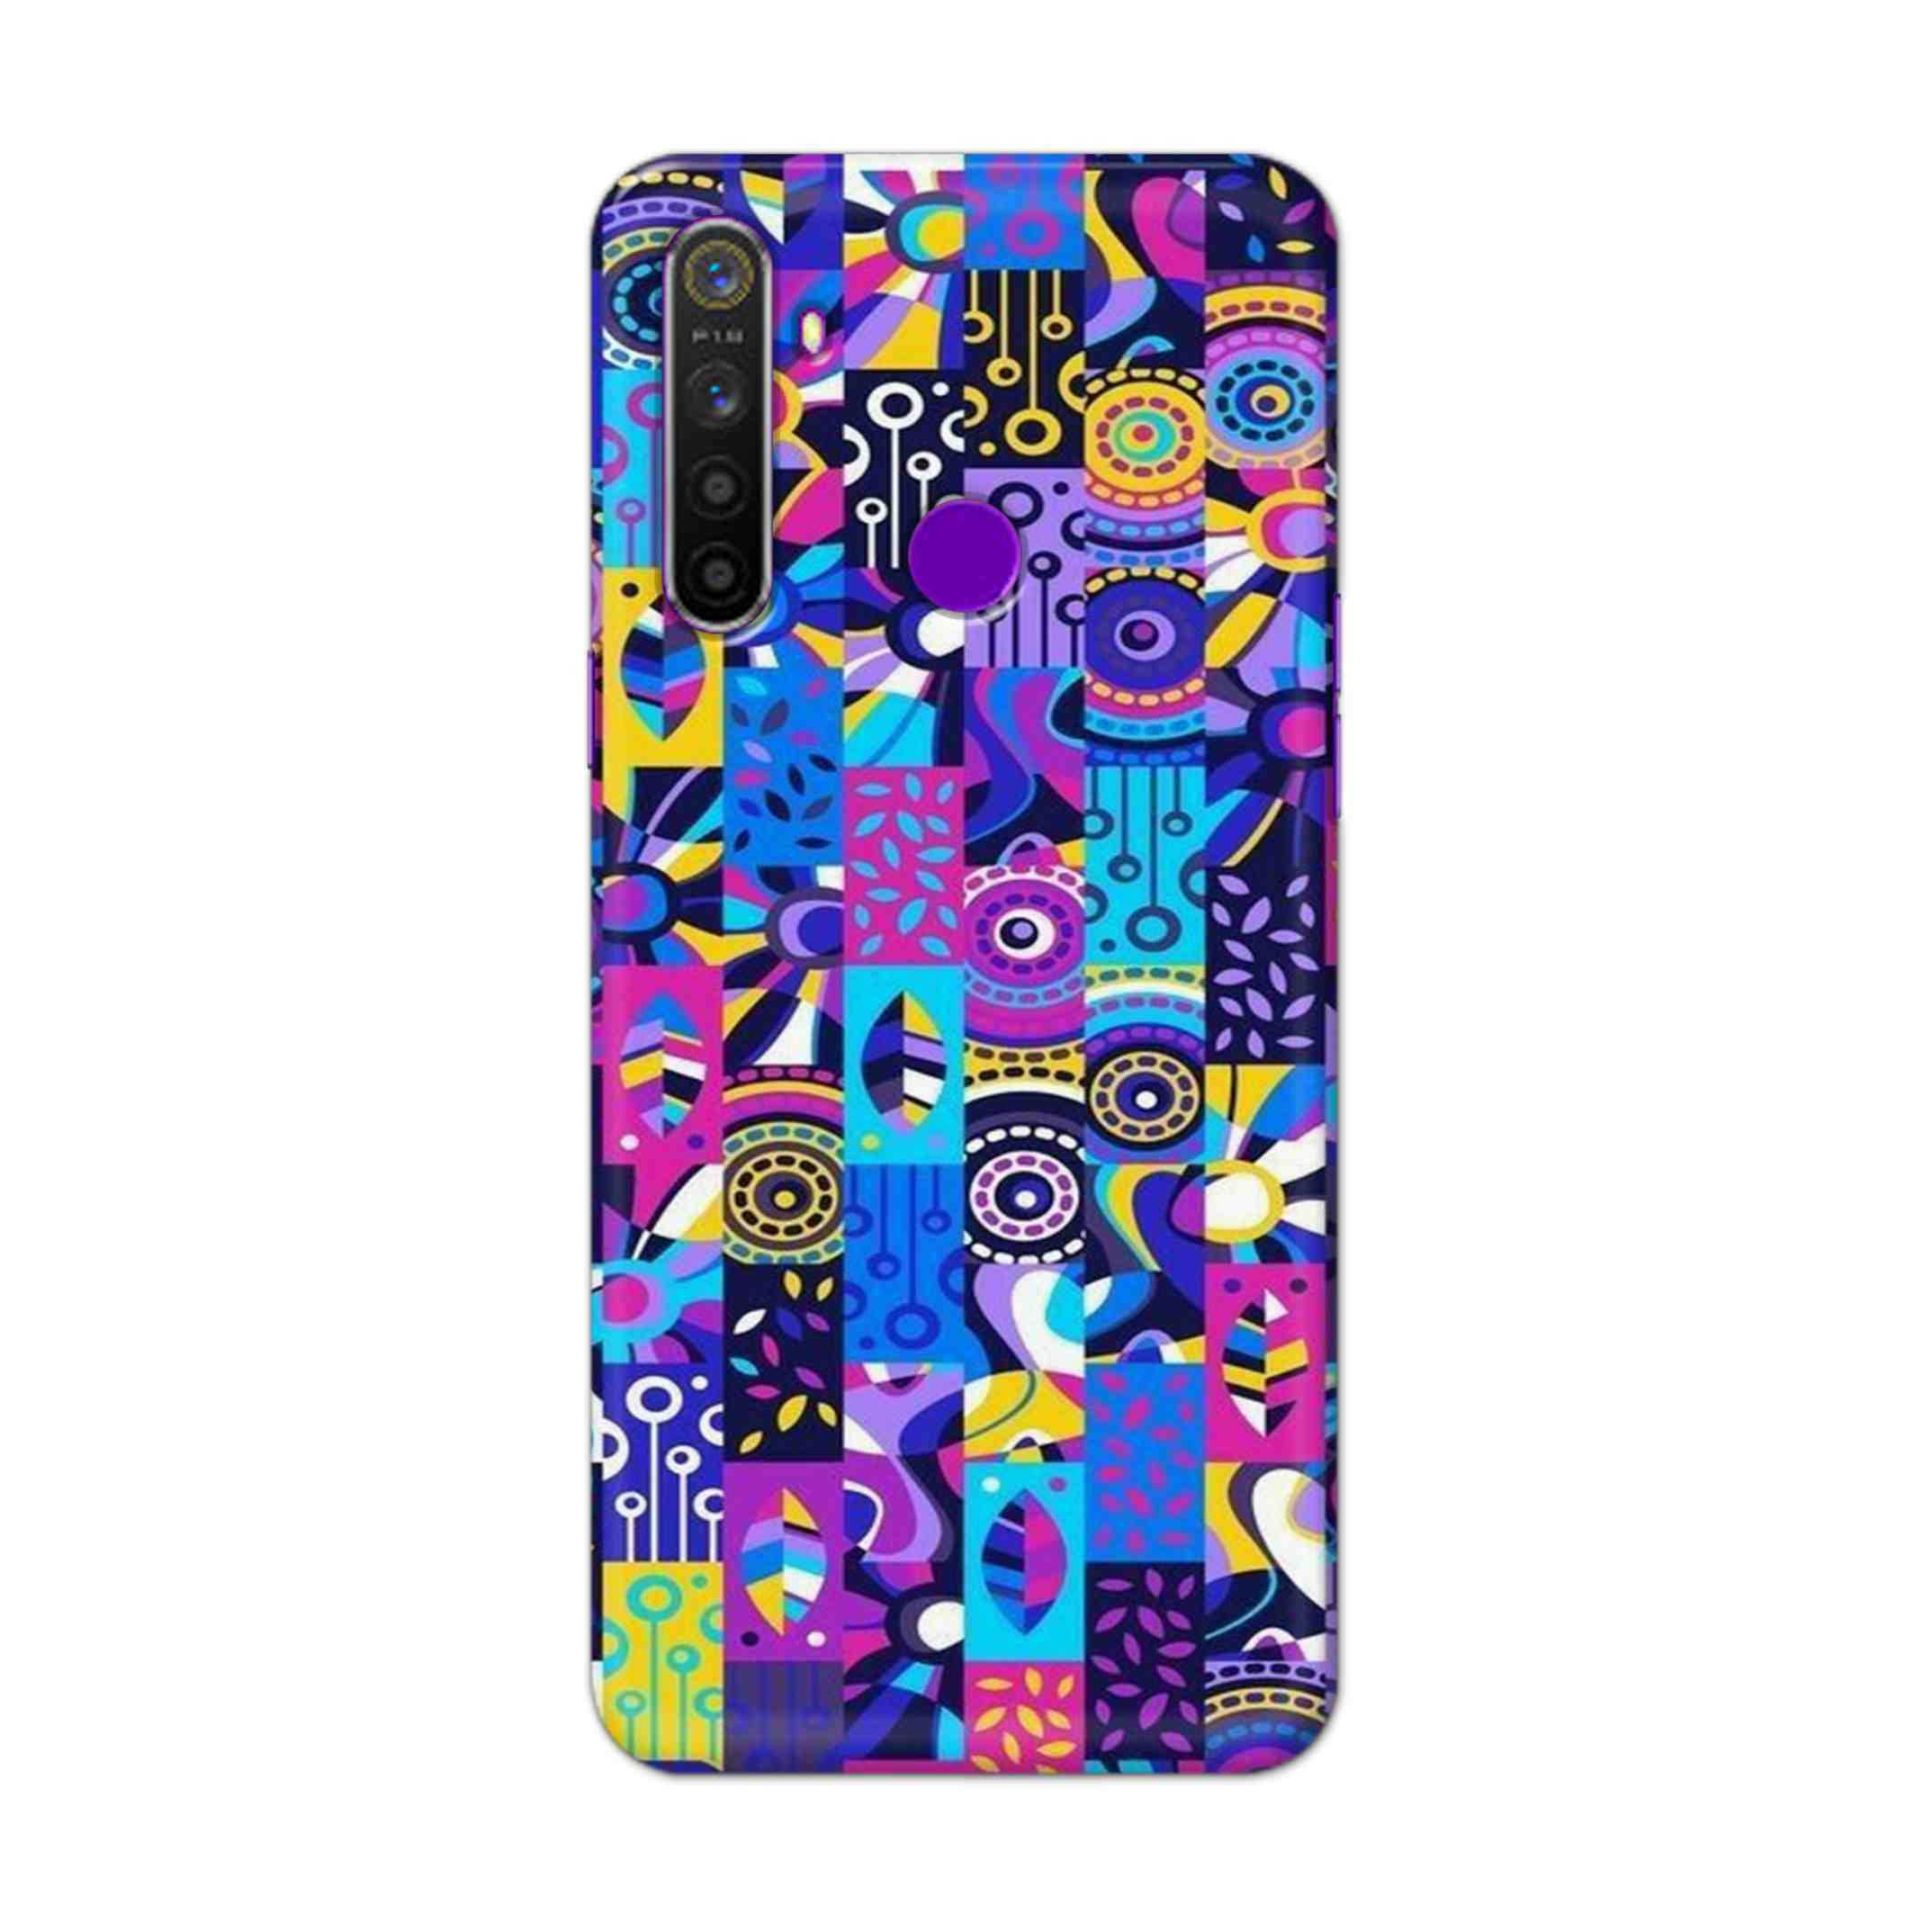 Buy Rainbow Art Hard Back Mobile Phone Case Cover For Realme 5 Pro Online